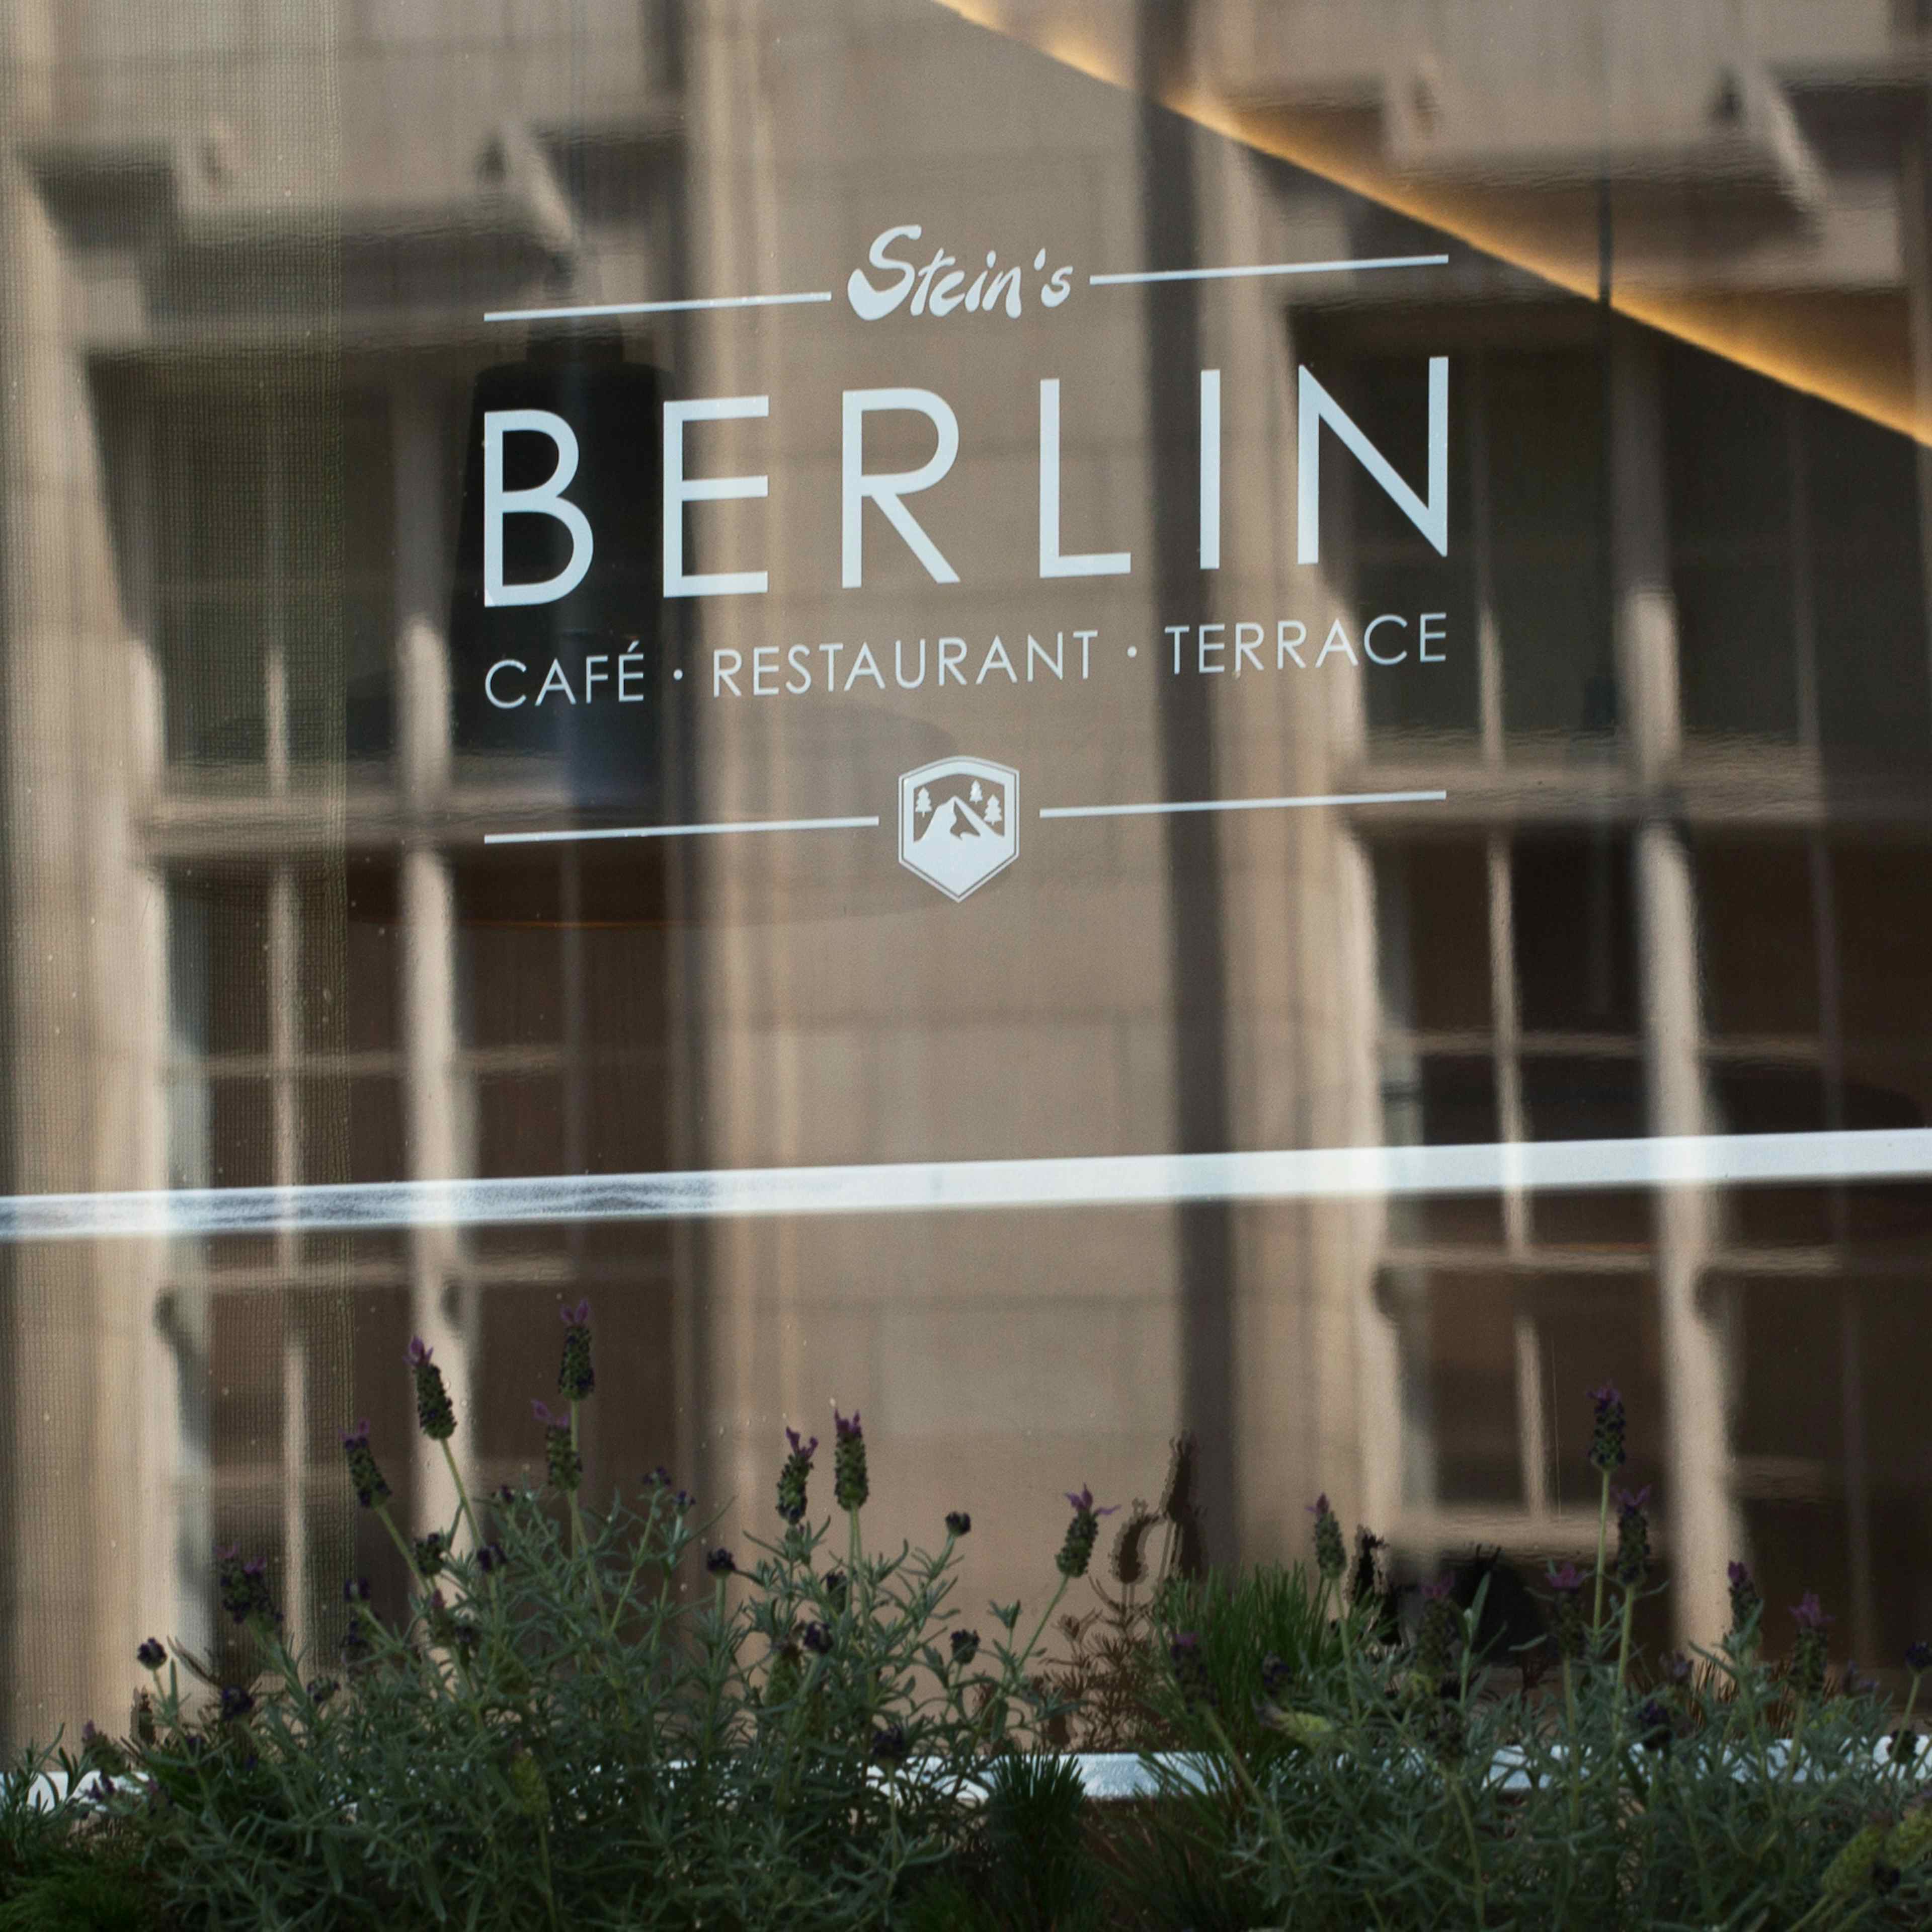 Stein's Berlin Restaurant and Terrace - Function Room image 1